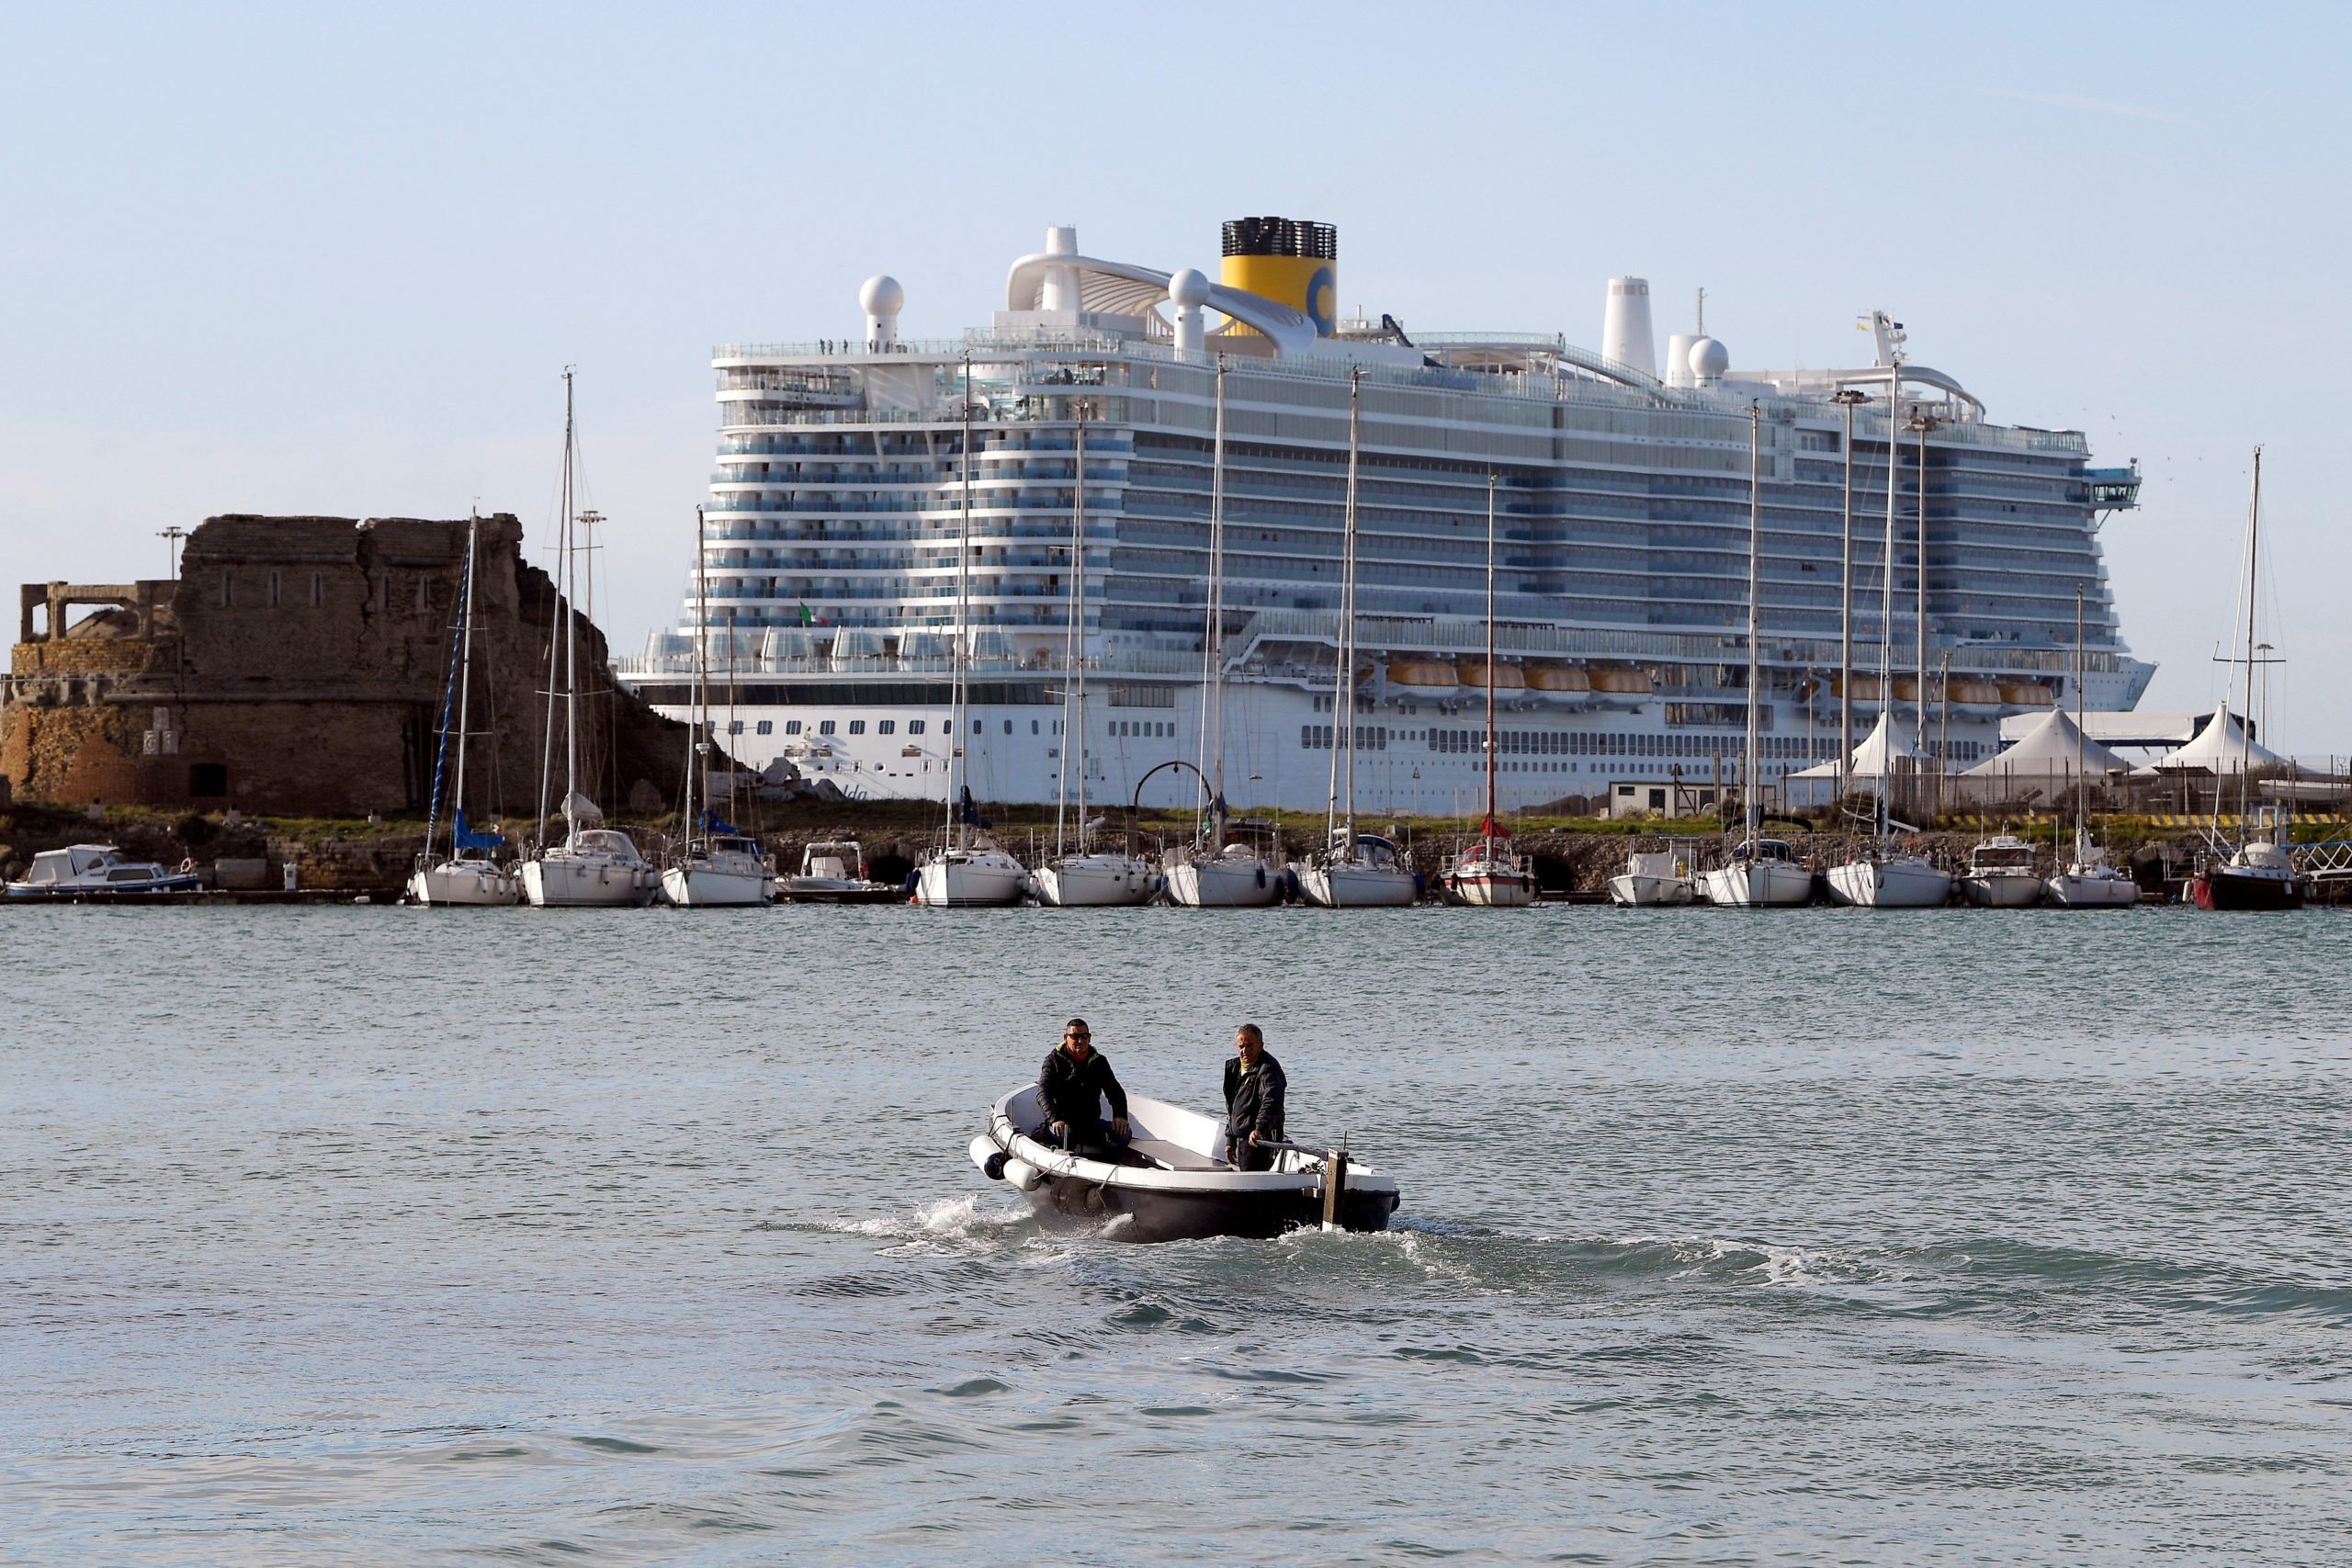 Italian cruise ship containing 6,000 vacationers in lockdown